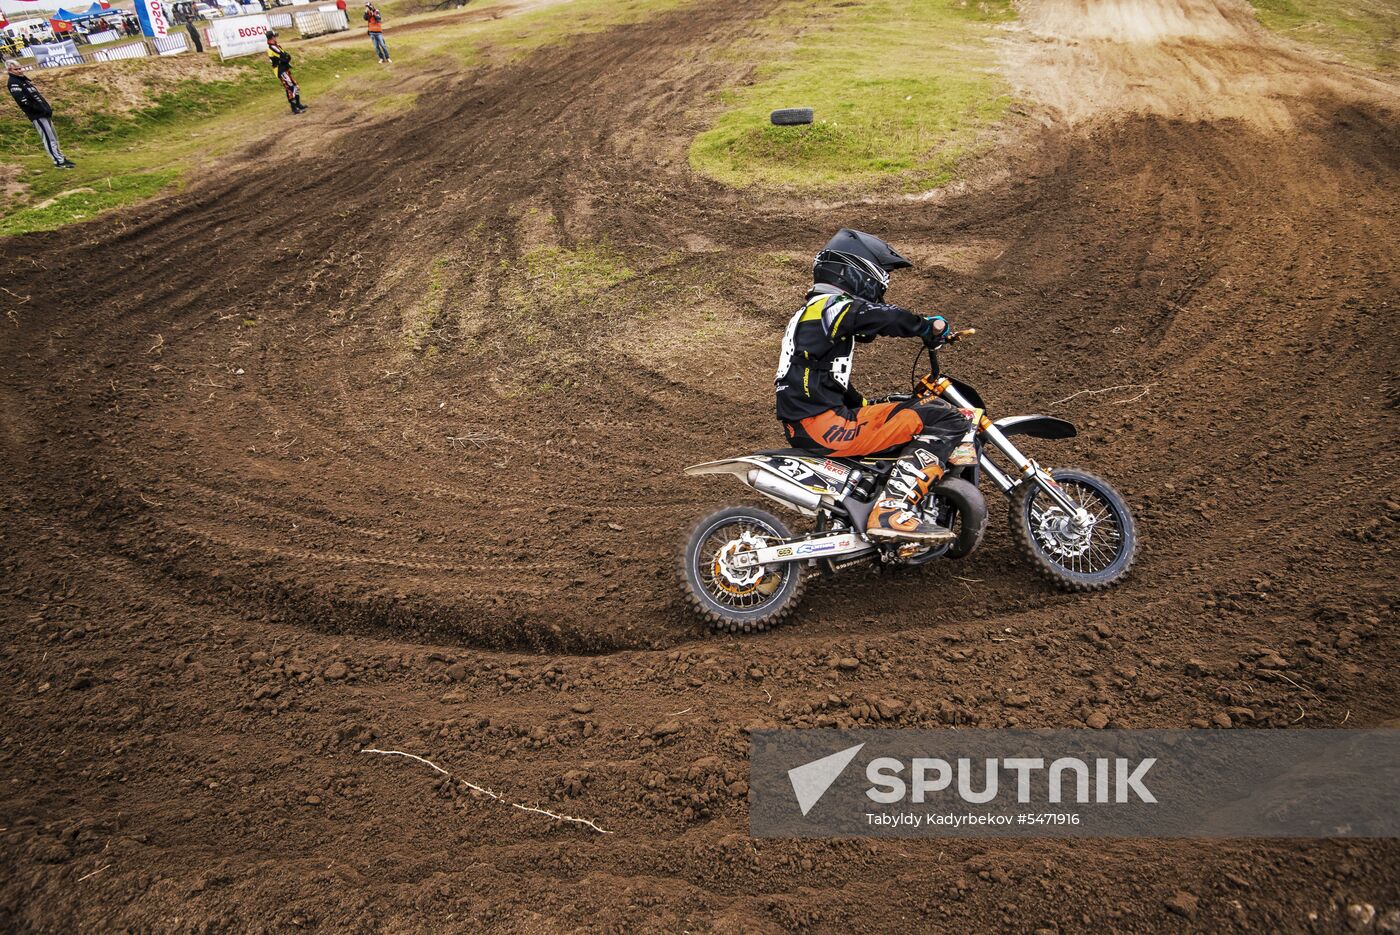 Commonwealth Motocross Cup in Kyrgyzstan